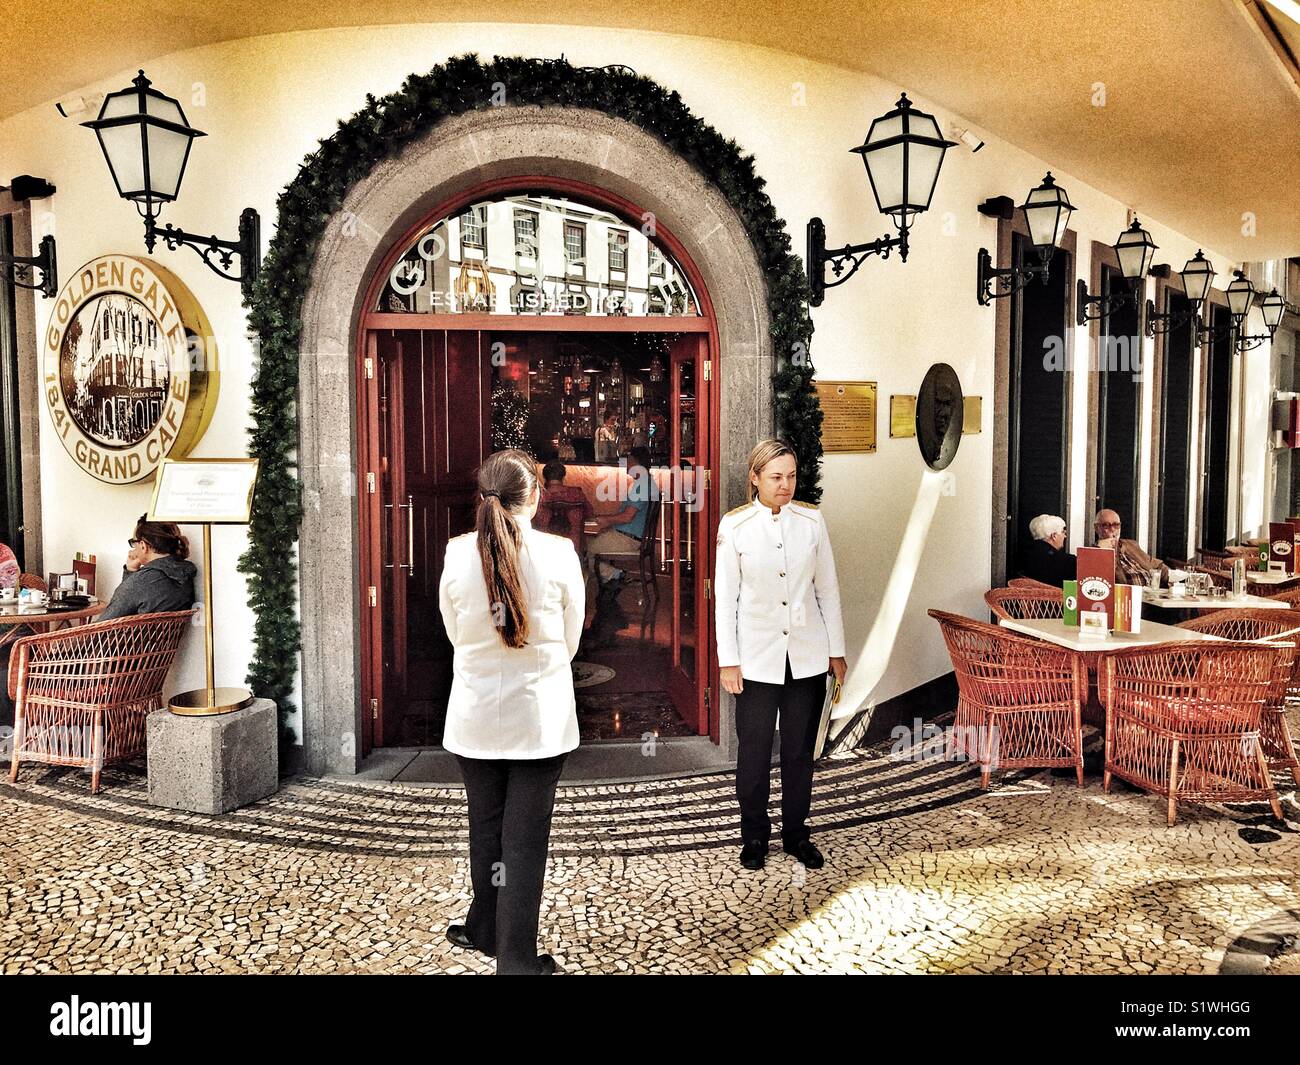 Waitresses outside the recently refurbished Golden Gate Grand Cafe on Avenida Zarco, Funchal, Madeira, Portugal Stock Photo